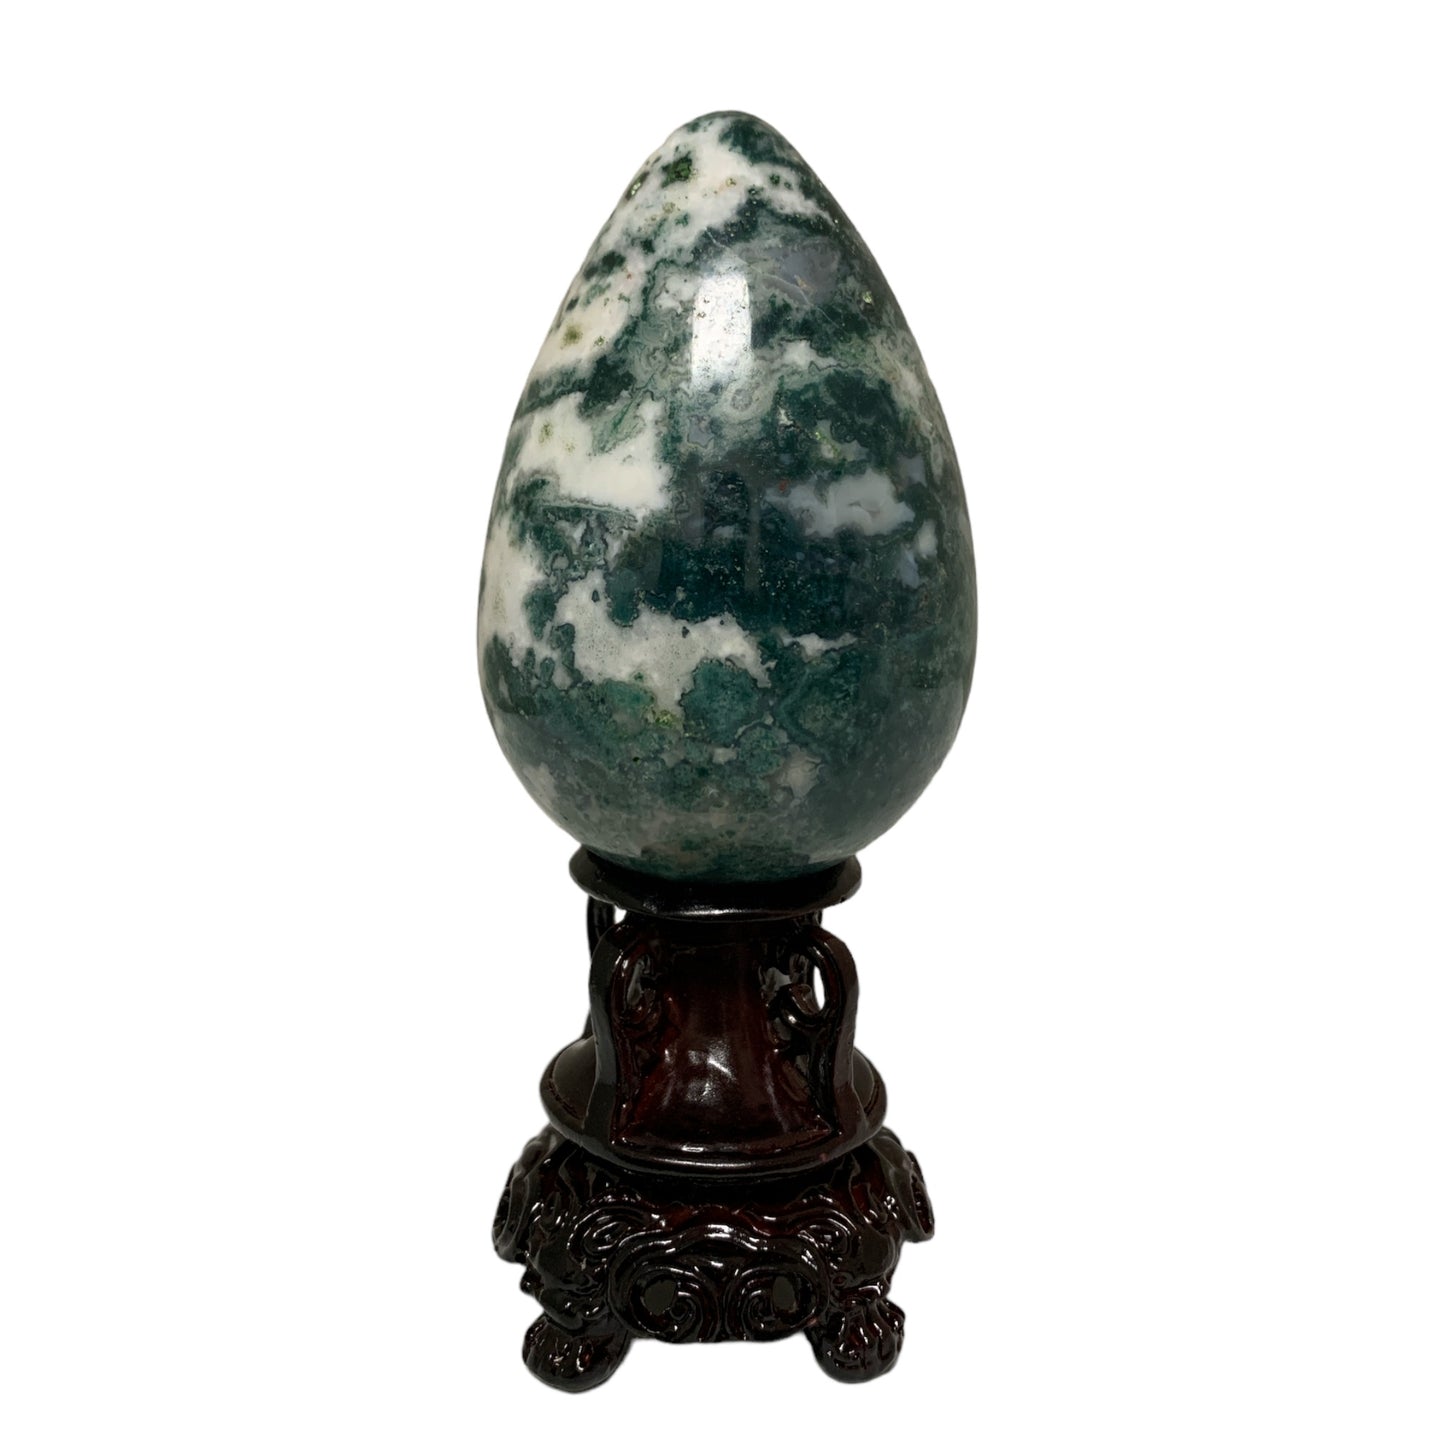 Tree Agate Eggs 52-63mm - Price per gram per piece (B2B ordering 1 = 1 piece so we charge Ex. 160g = $16.00 each)